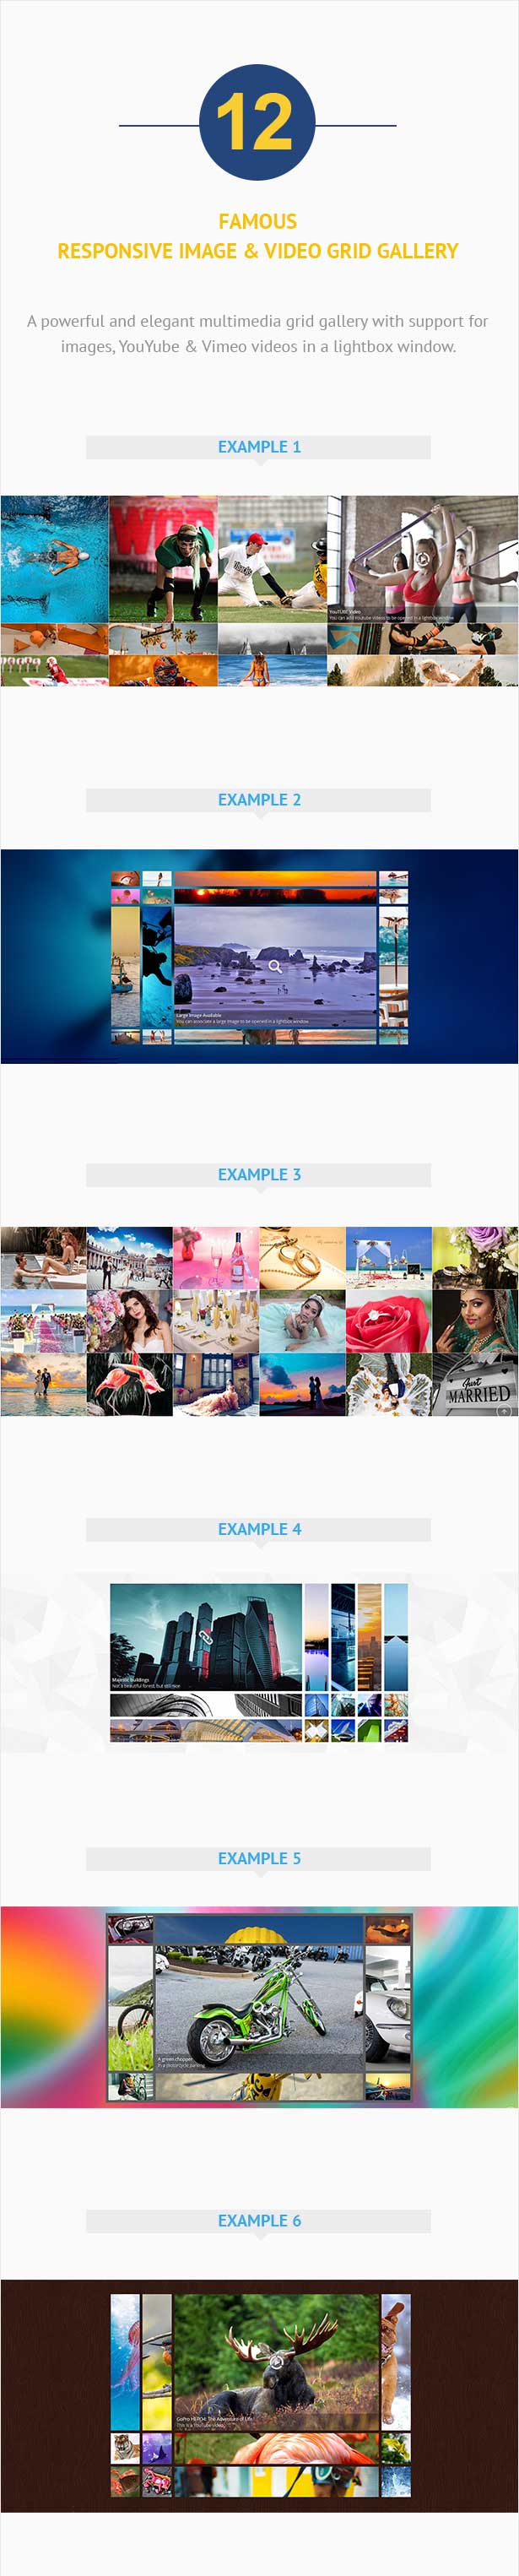 WPBakery Addon – Famous - Responsive Image & Video Grid Gallery for WPBakery Page Builder (formerly Visual Composer)